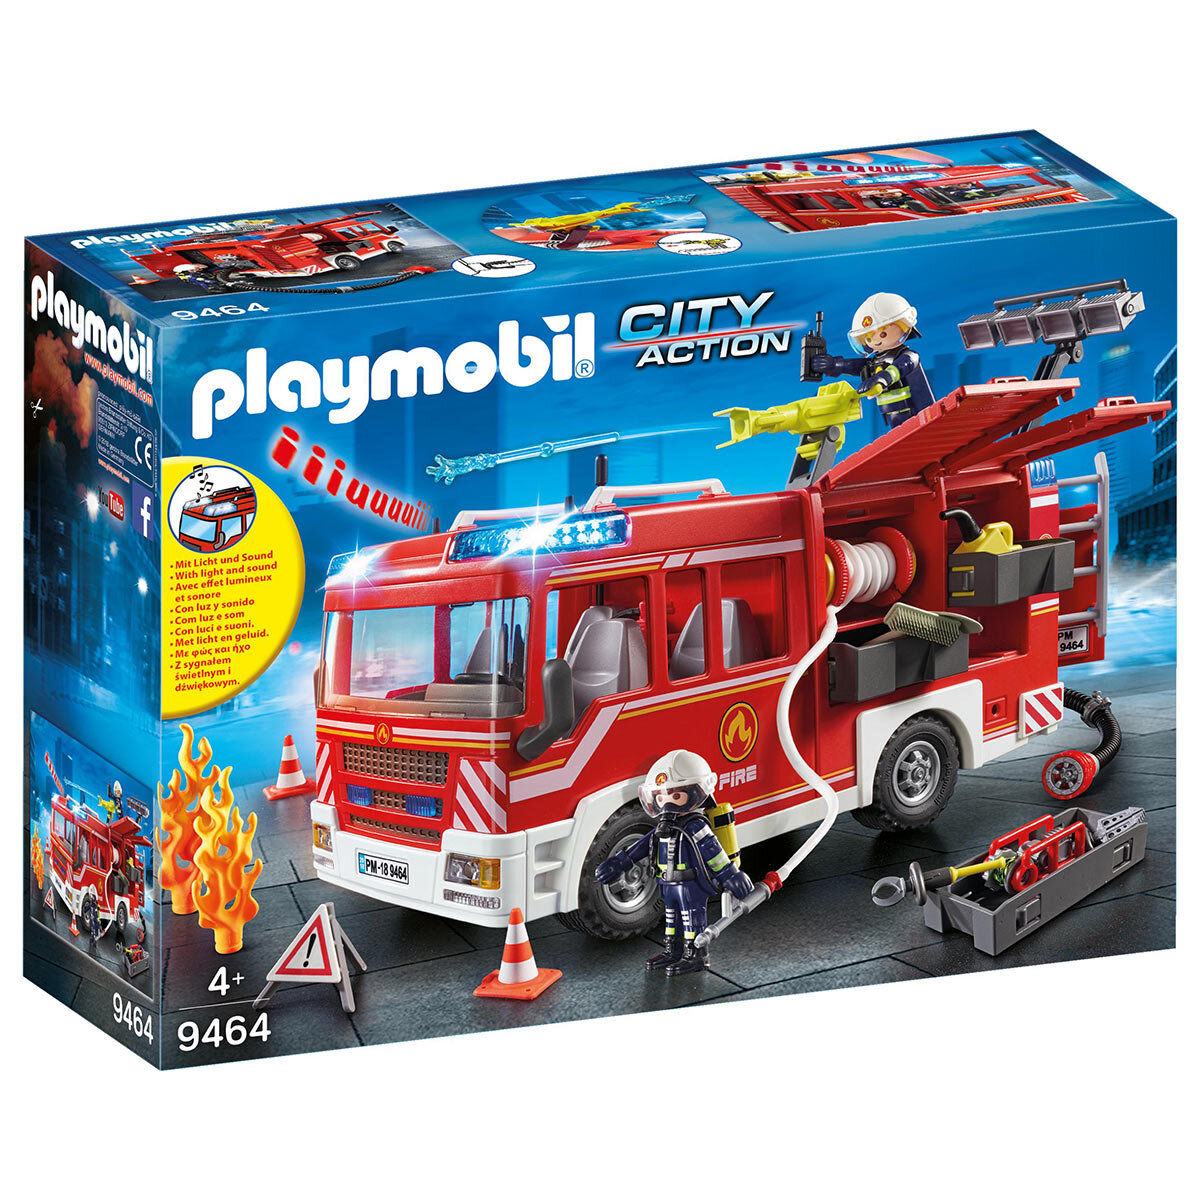 Buy Playmobil Fire Engine Box Image at Costco.co.uk